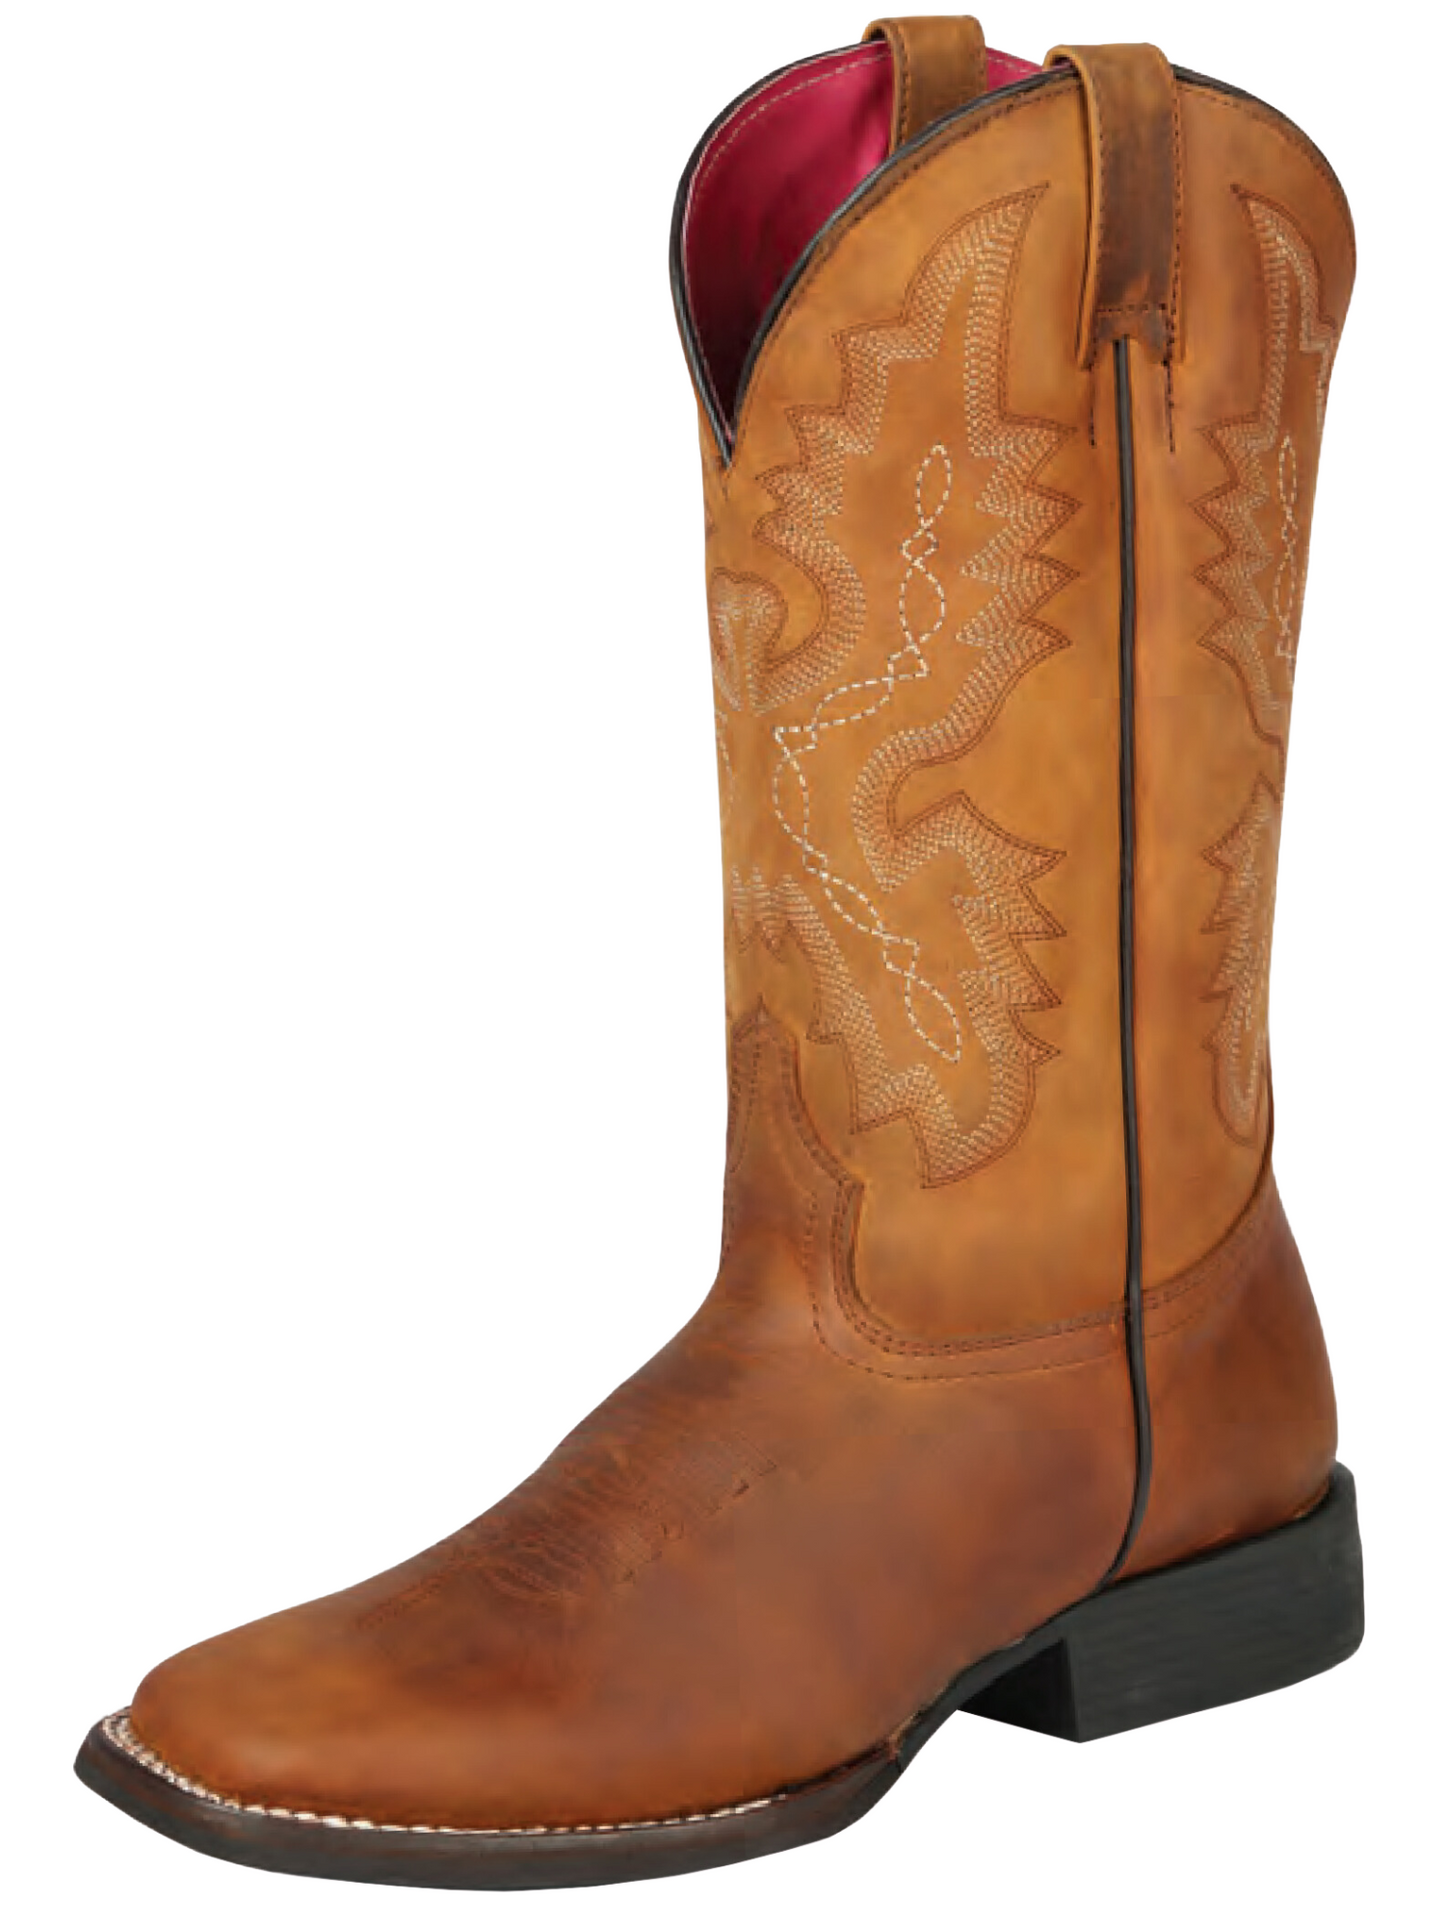 Classic Genuine Leather Rodeo Cowboy Boots for Women 'El General' - ID: 44651 Cowgirl Boots El General